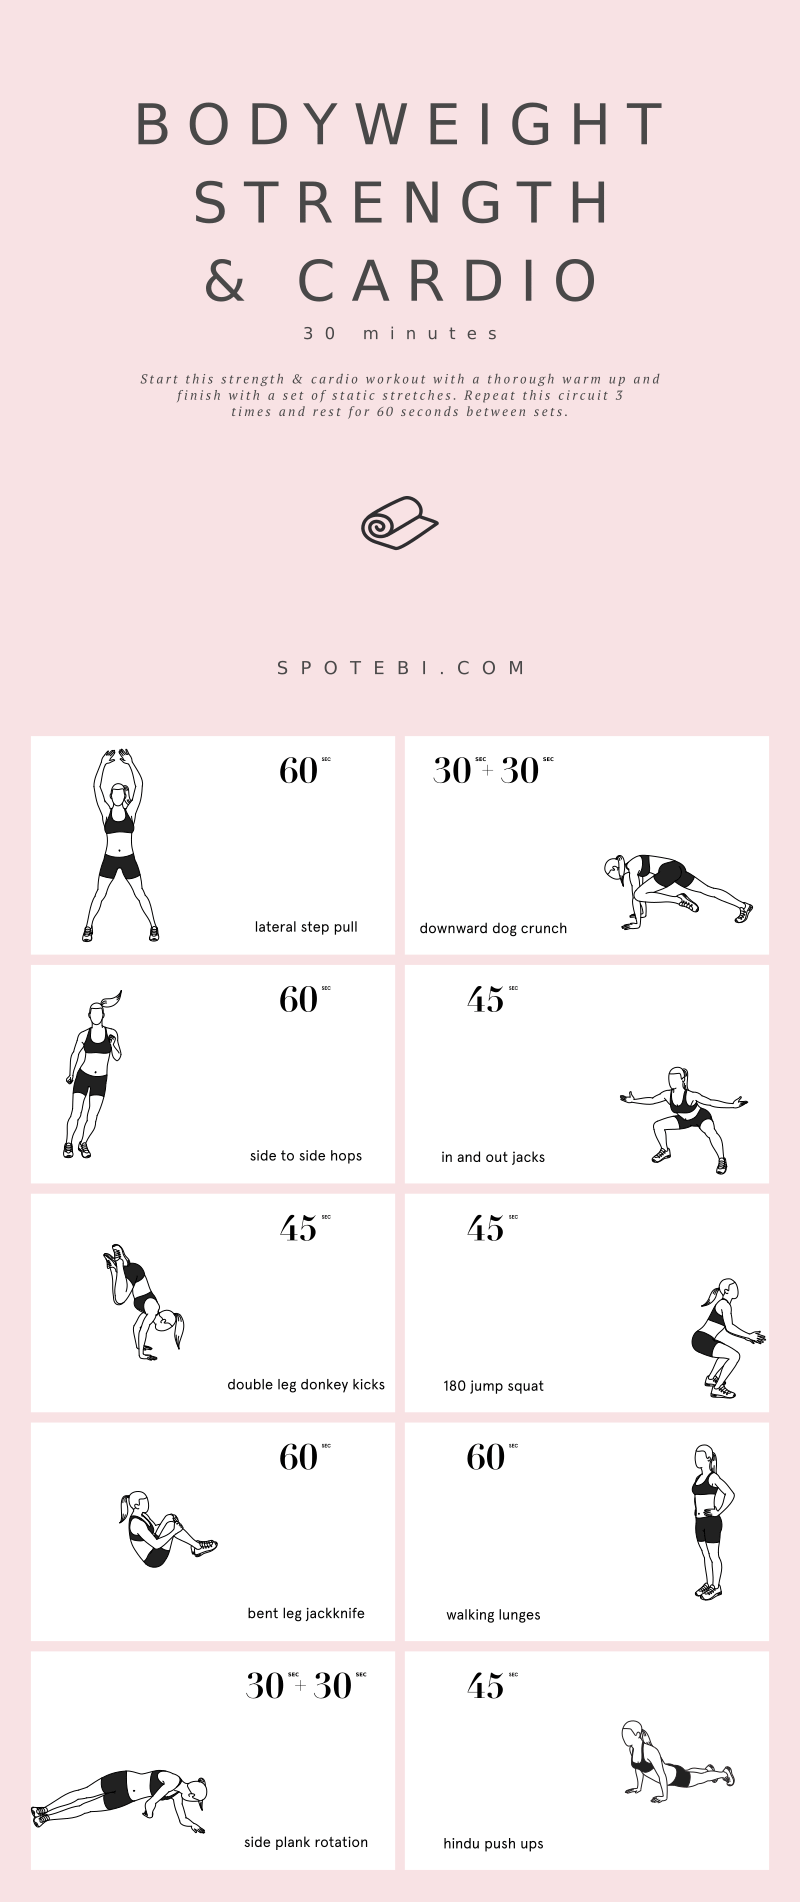 Strengthen your whole body, reduce stress, and boost your calorie burn at home with this strength and cardio bodyweight routine for women. If you're bored with your workouts, or just want to mix things up, this no-equipment circuit is a perfect choice! https://www.spotebi.com/workout-routines/strength-cardio-bodyweight-routine/